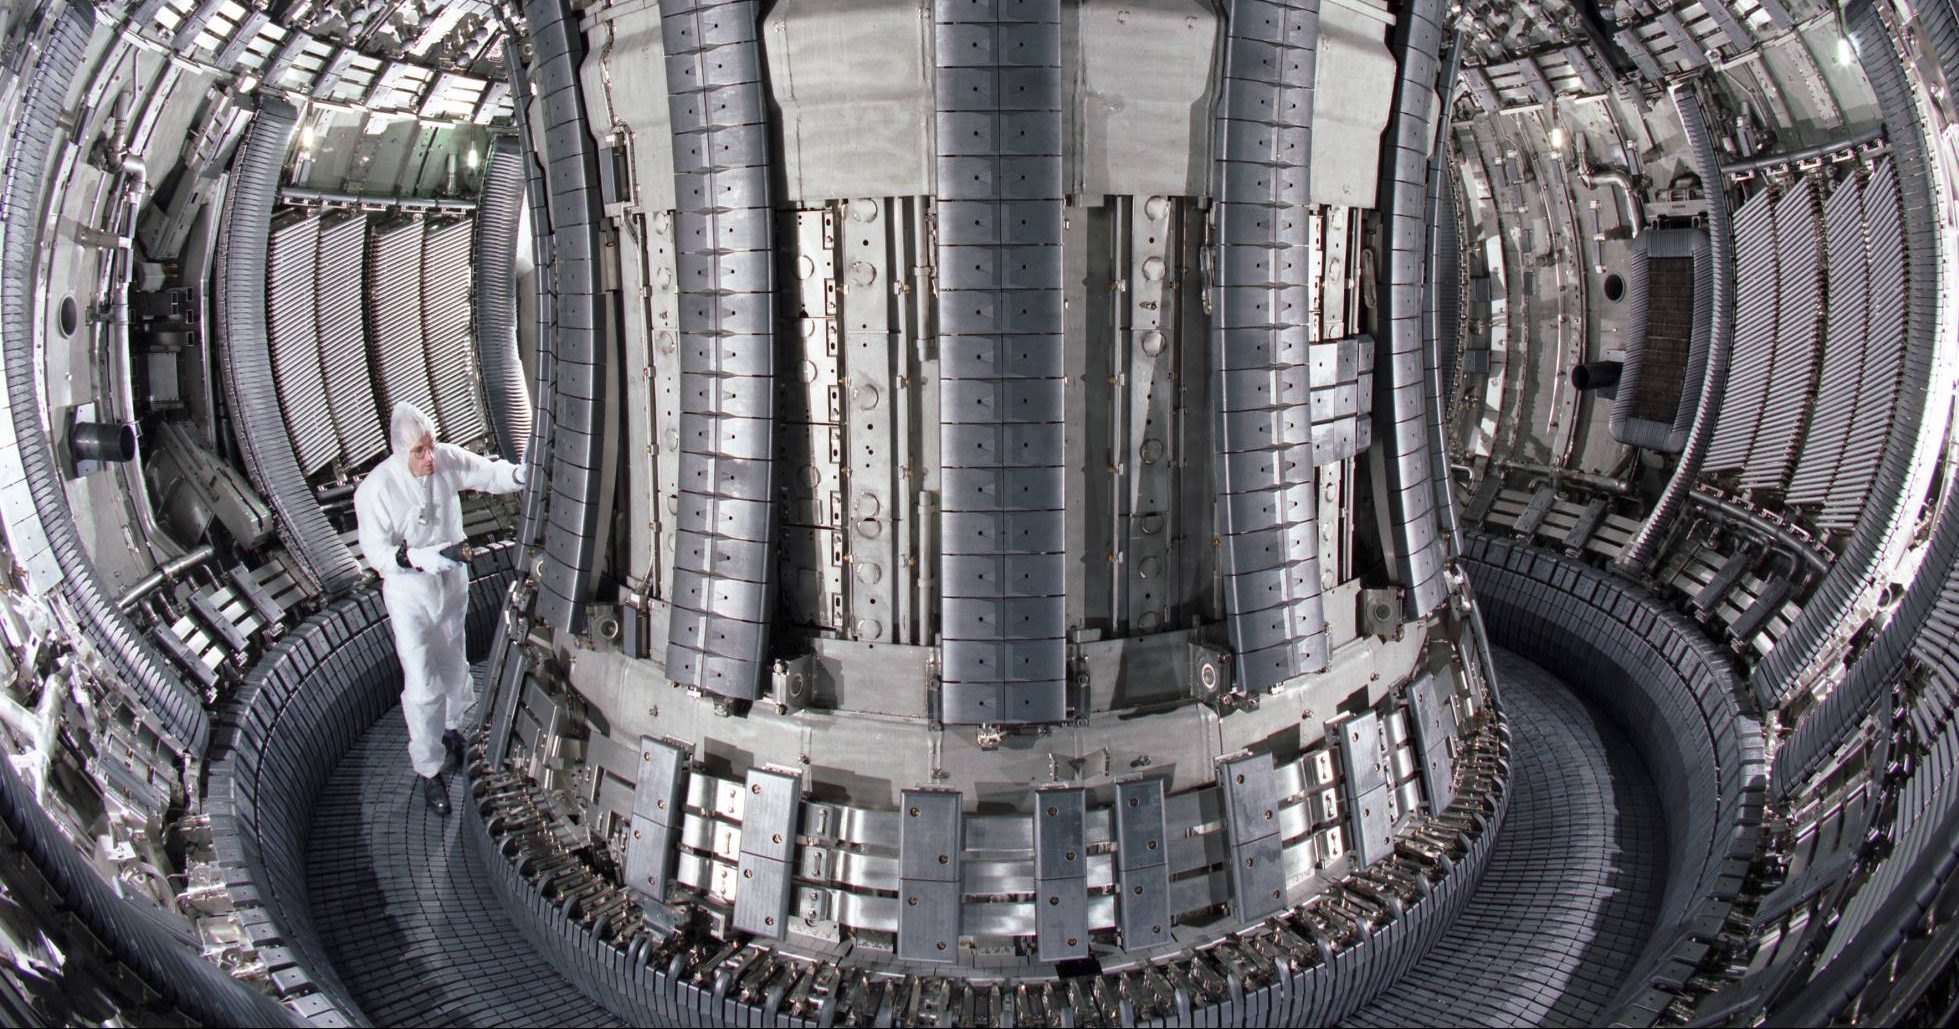 JET nuclear fusion reactor shatters record for energy production